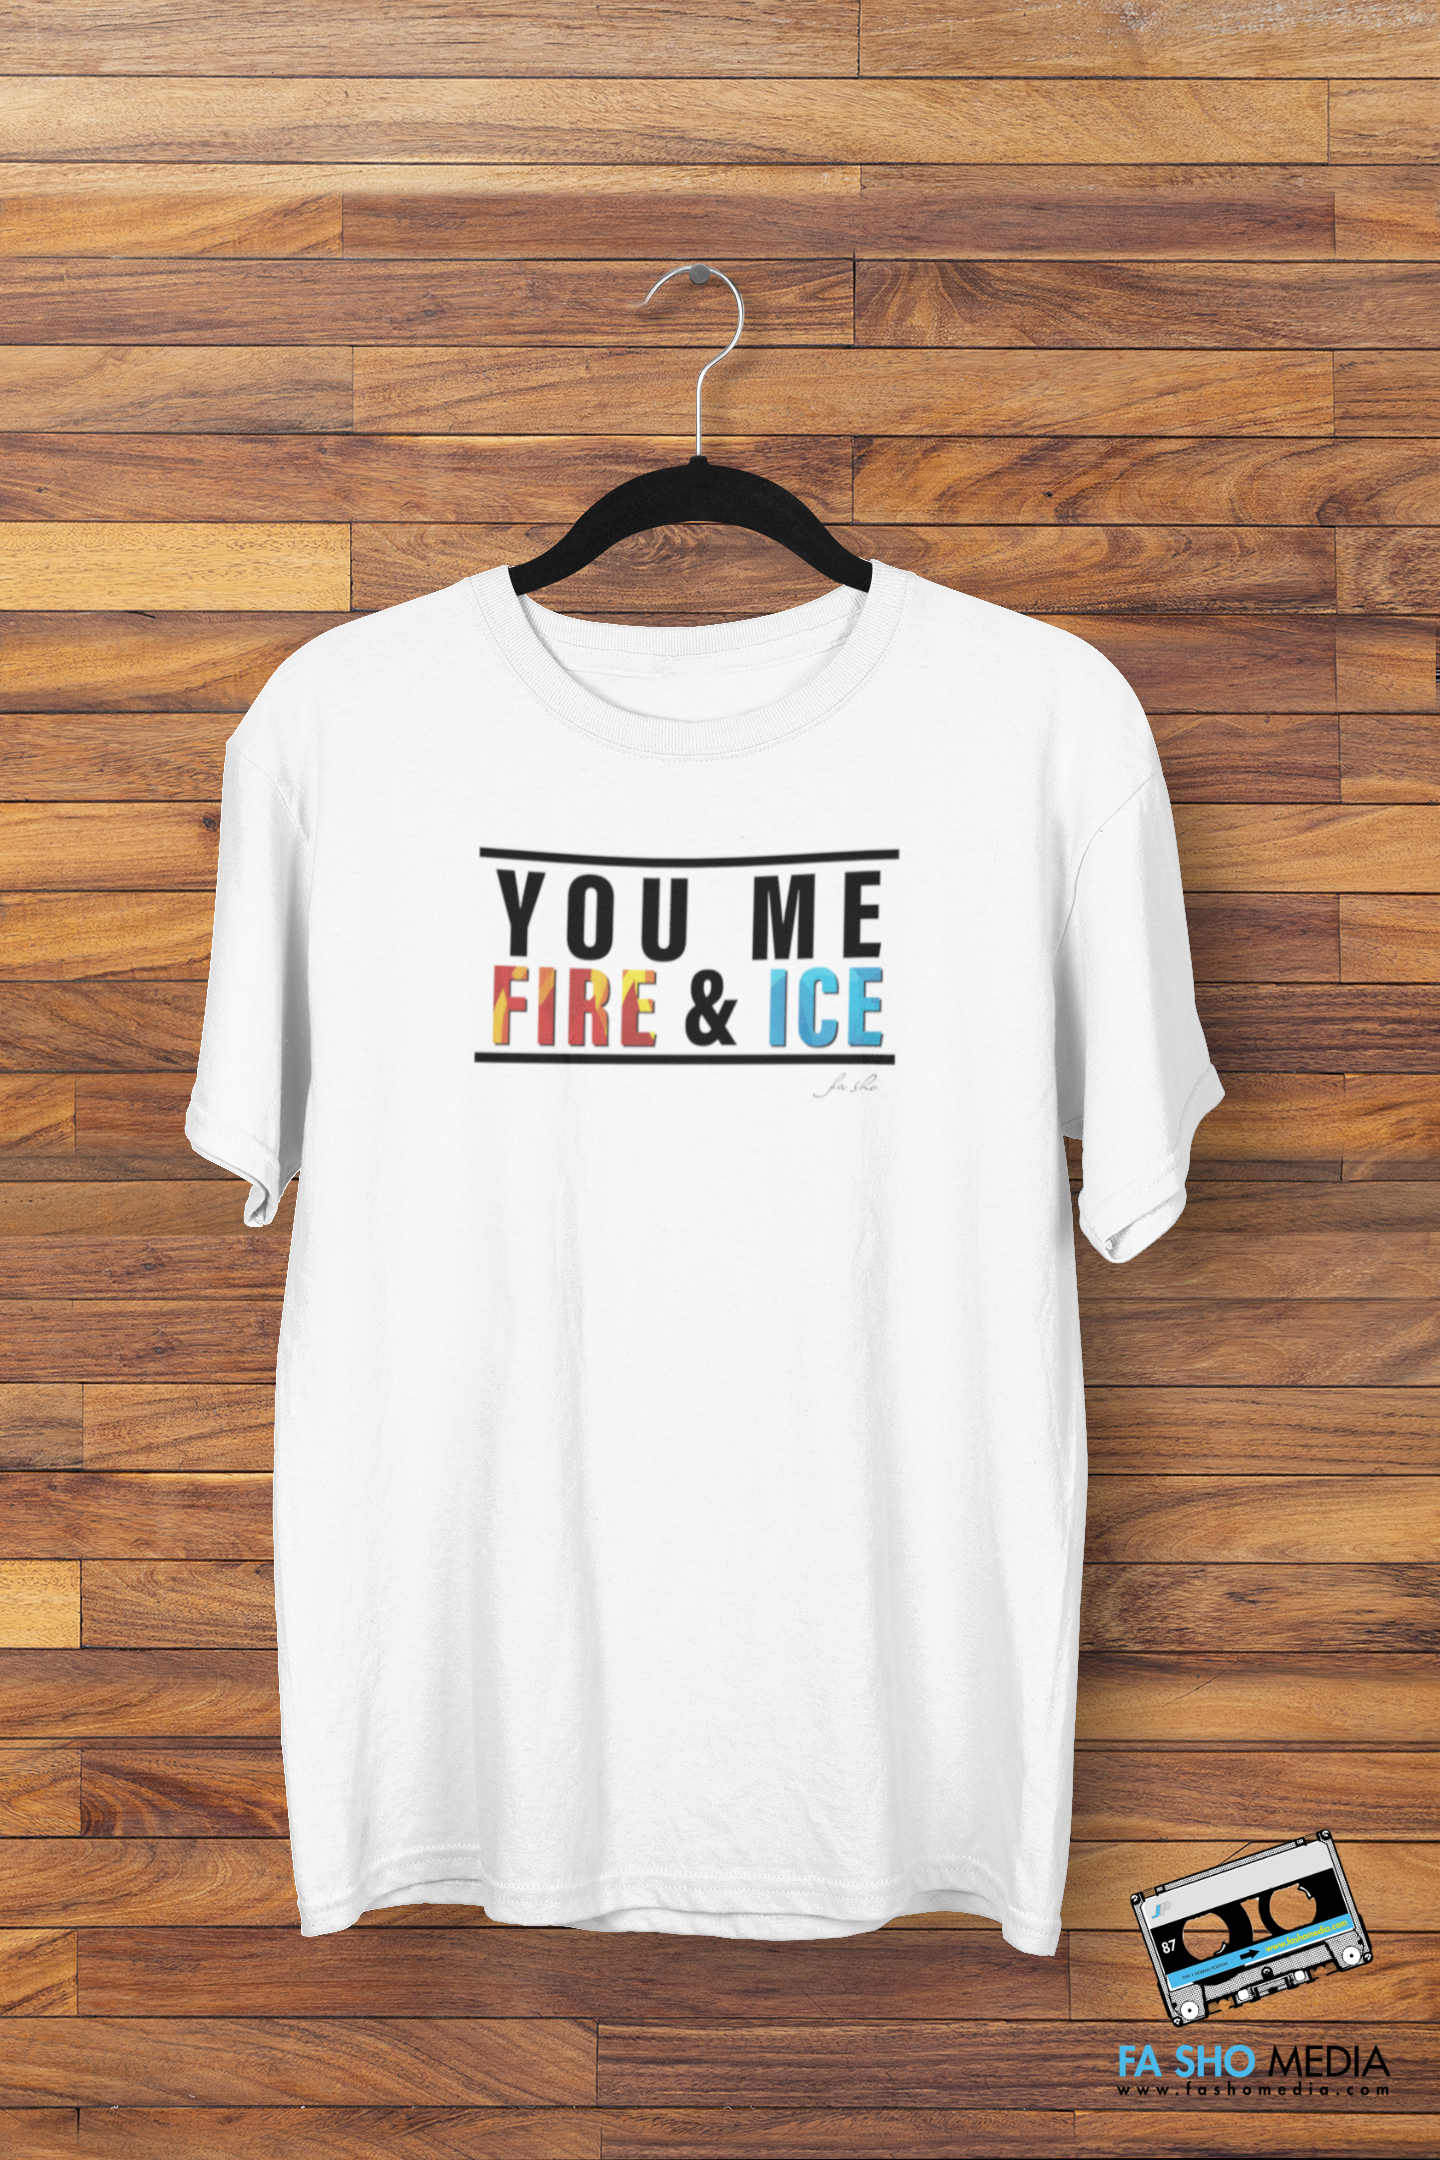 Fire and Ice Shirt